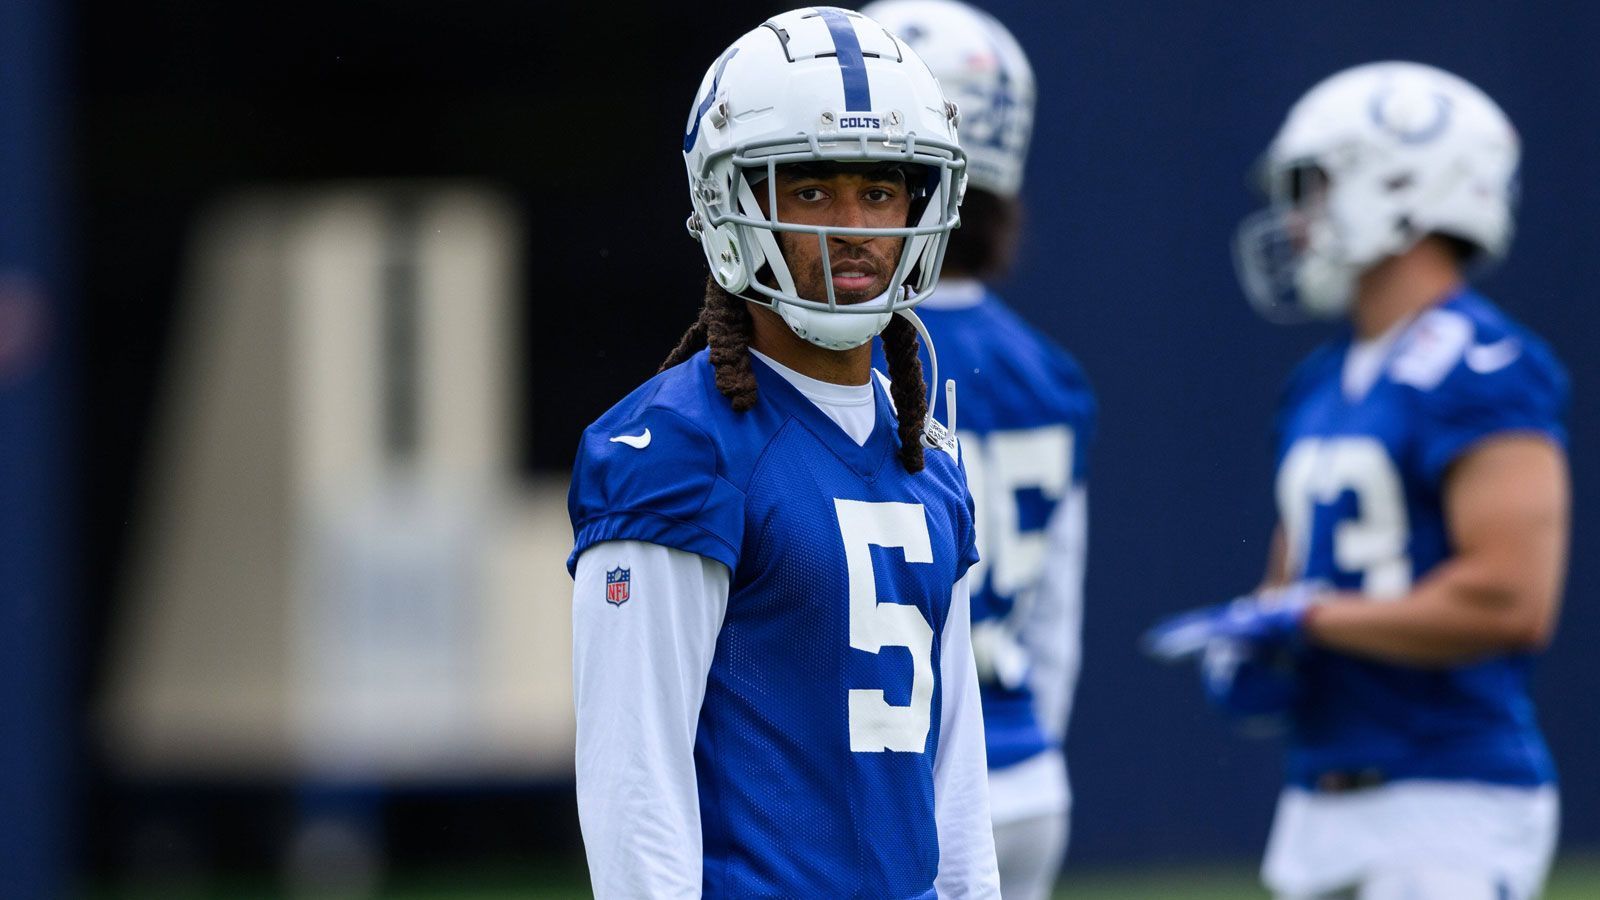 
                <strong>Platz 6 (geteilt): Stephon Gilmore</strong><br>
                &#x2022; Team: Indianapolis Colts<br>&#x2022; <strong>Overall Rating: 91</strong><br>&#x2022; Key Stats: Acceleration: 93 – Awareness: 91 – Stamina: 93<br>
              